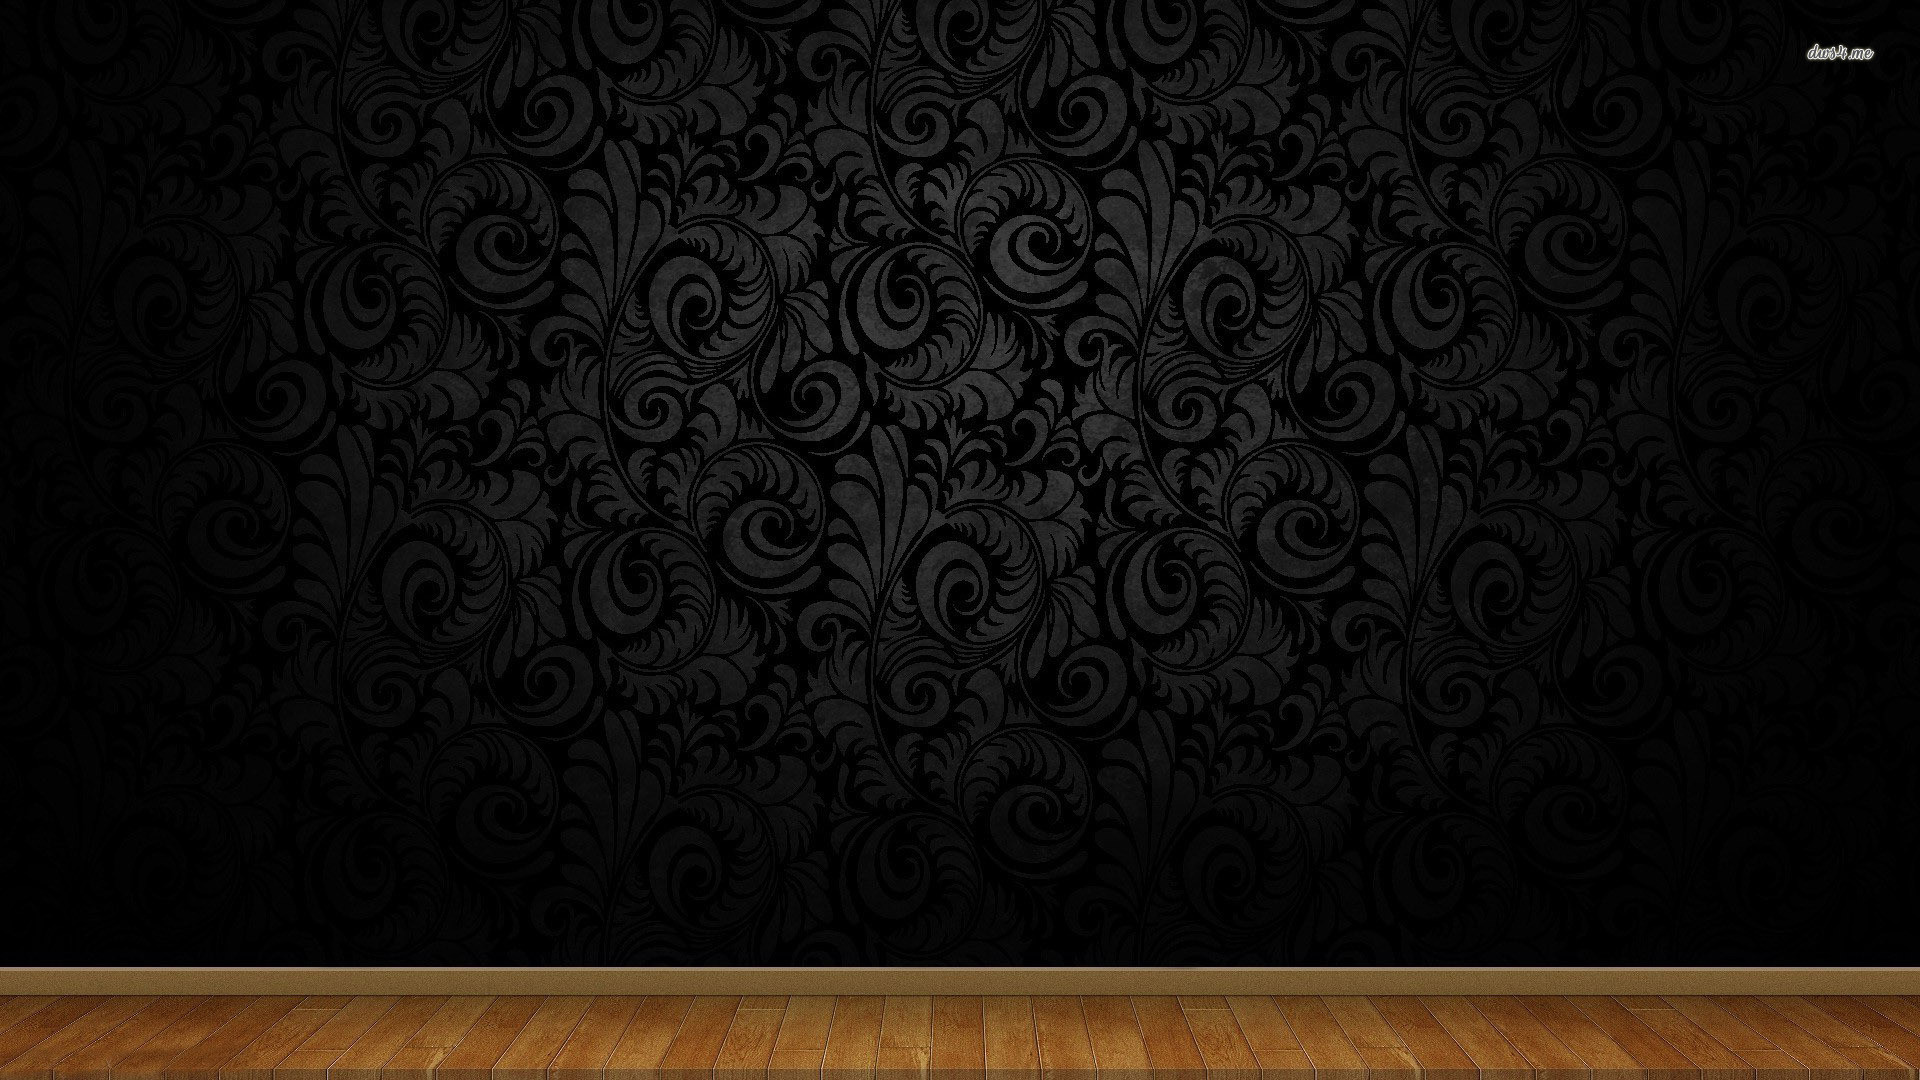 Wallpaper Swirly wall pattern and wood floor